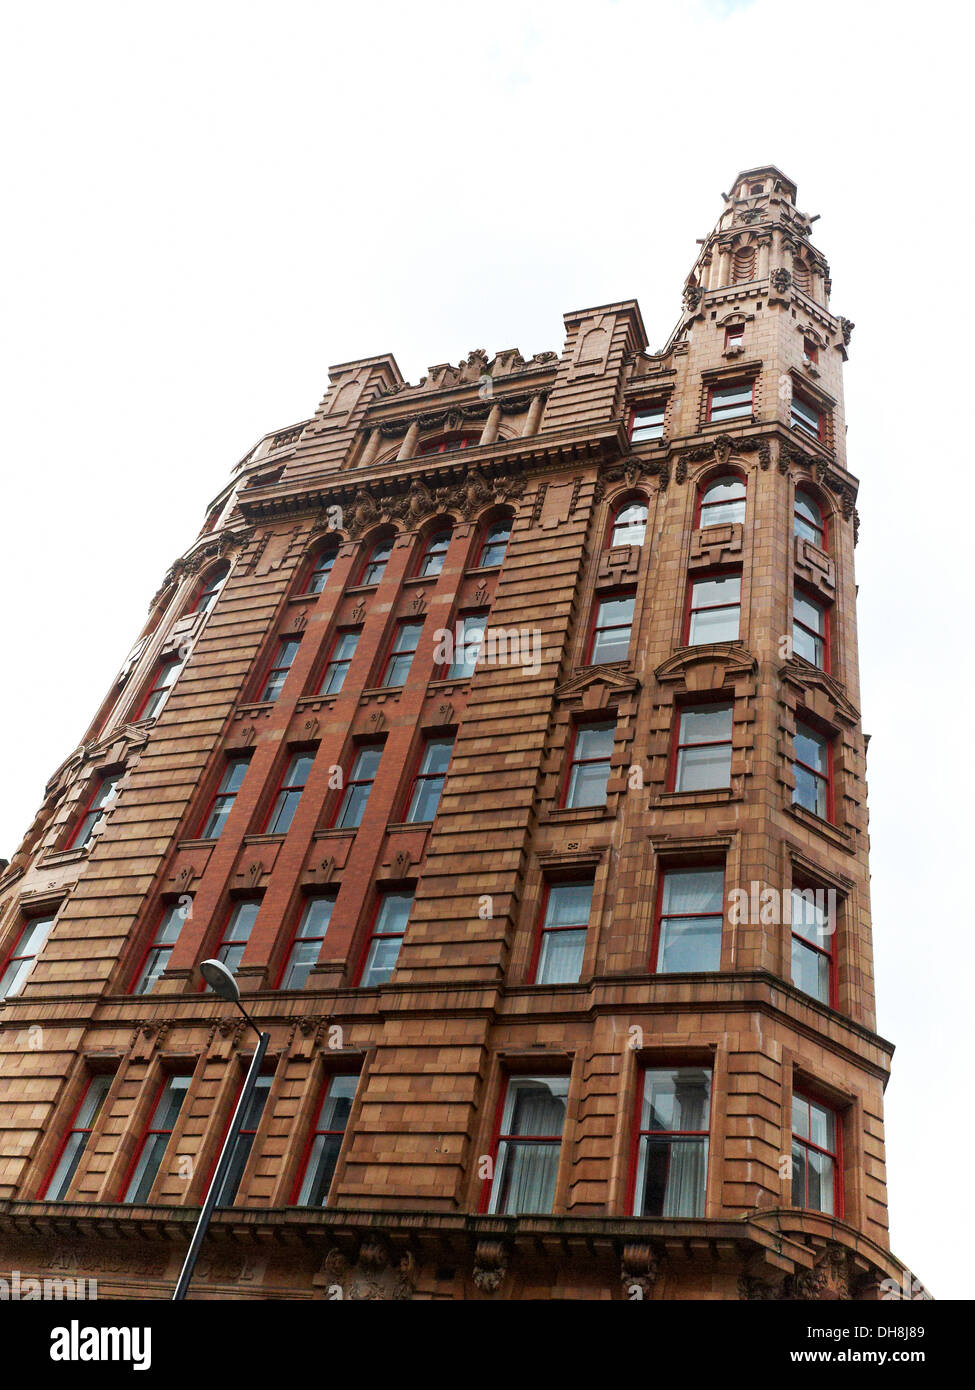 Looking up at Lancaster House on Whitworth Street in Manchester UK Stock Photo